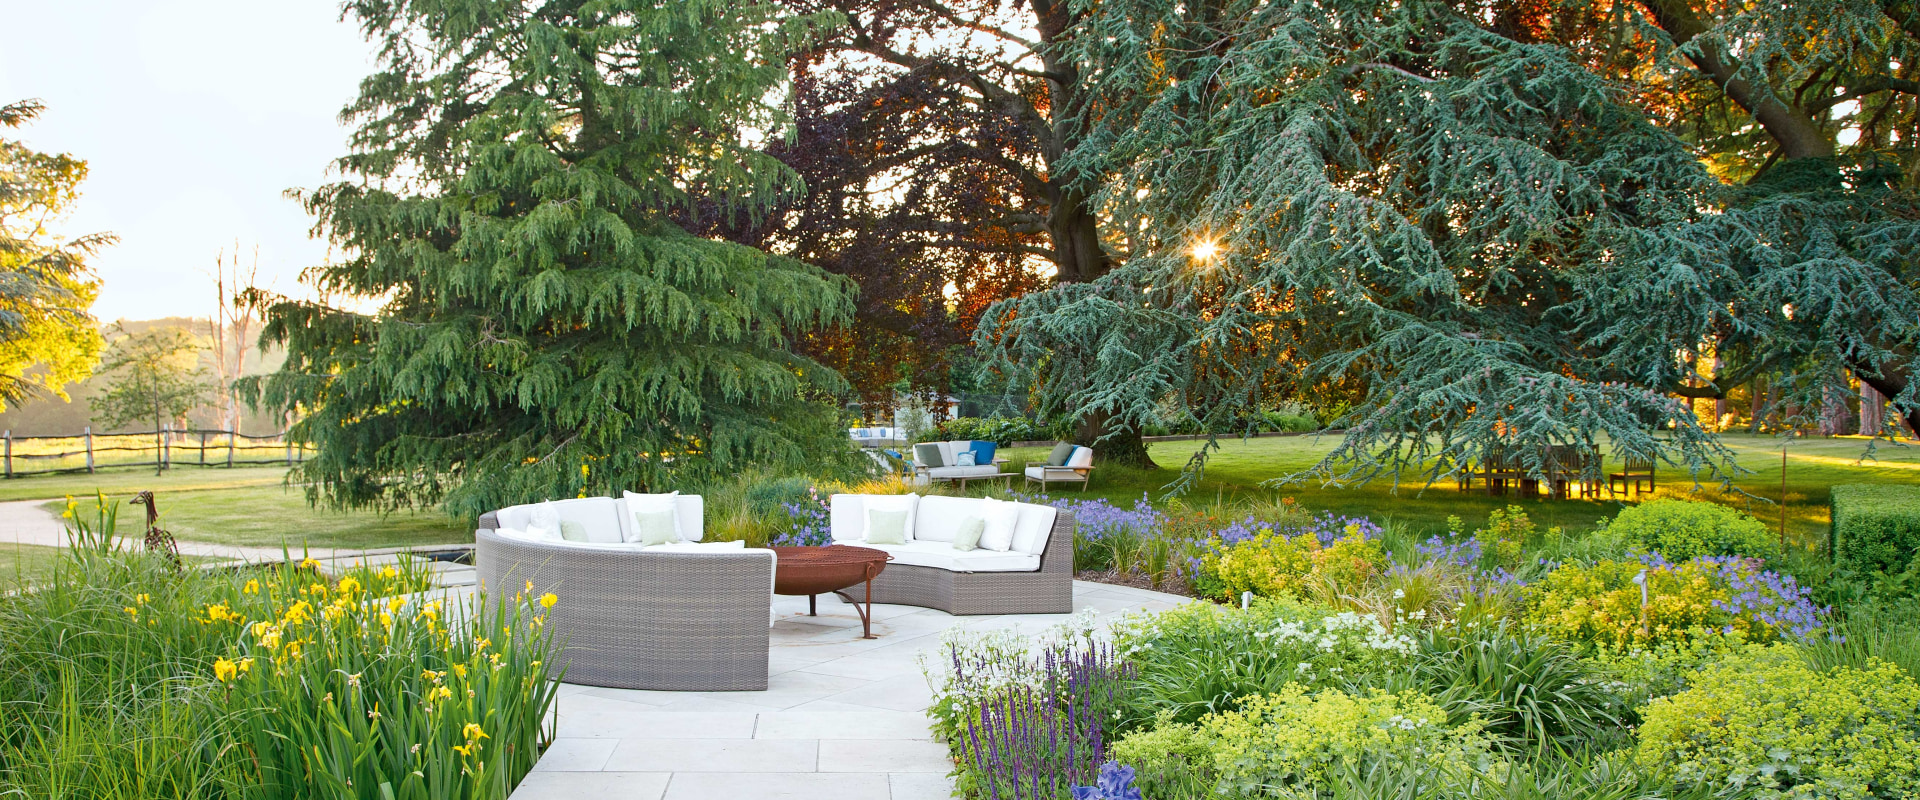 A Complete Guide to Walkways and Pathways for Your Outdoor Living Space